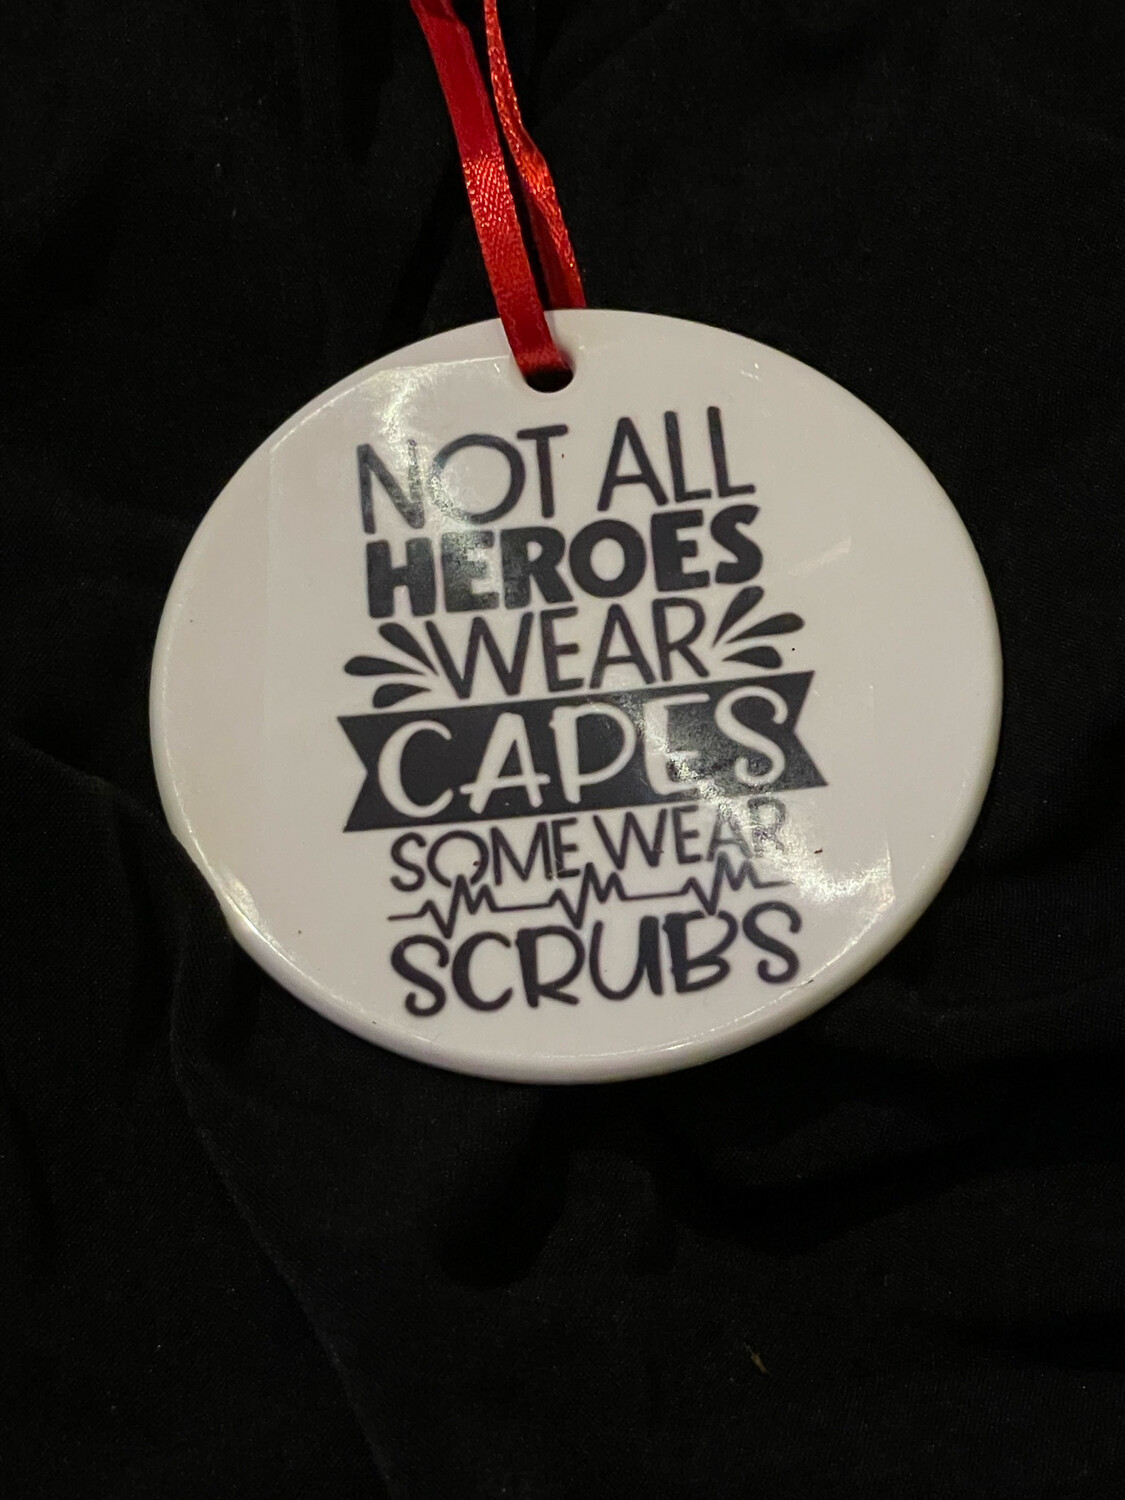 “Not All Heroes Wear Capes Some Wear Scrubs” Ornament